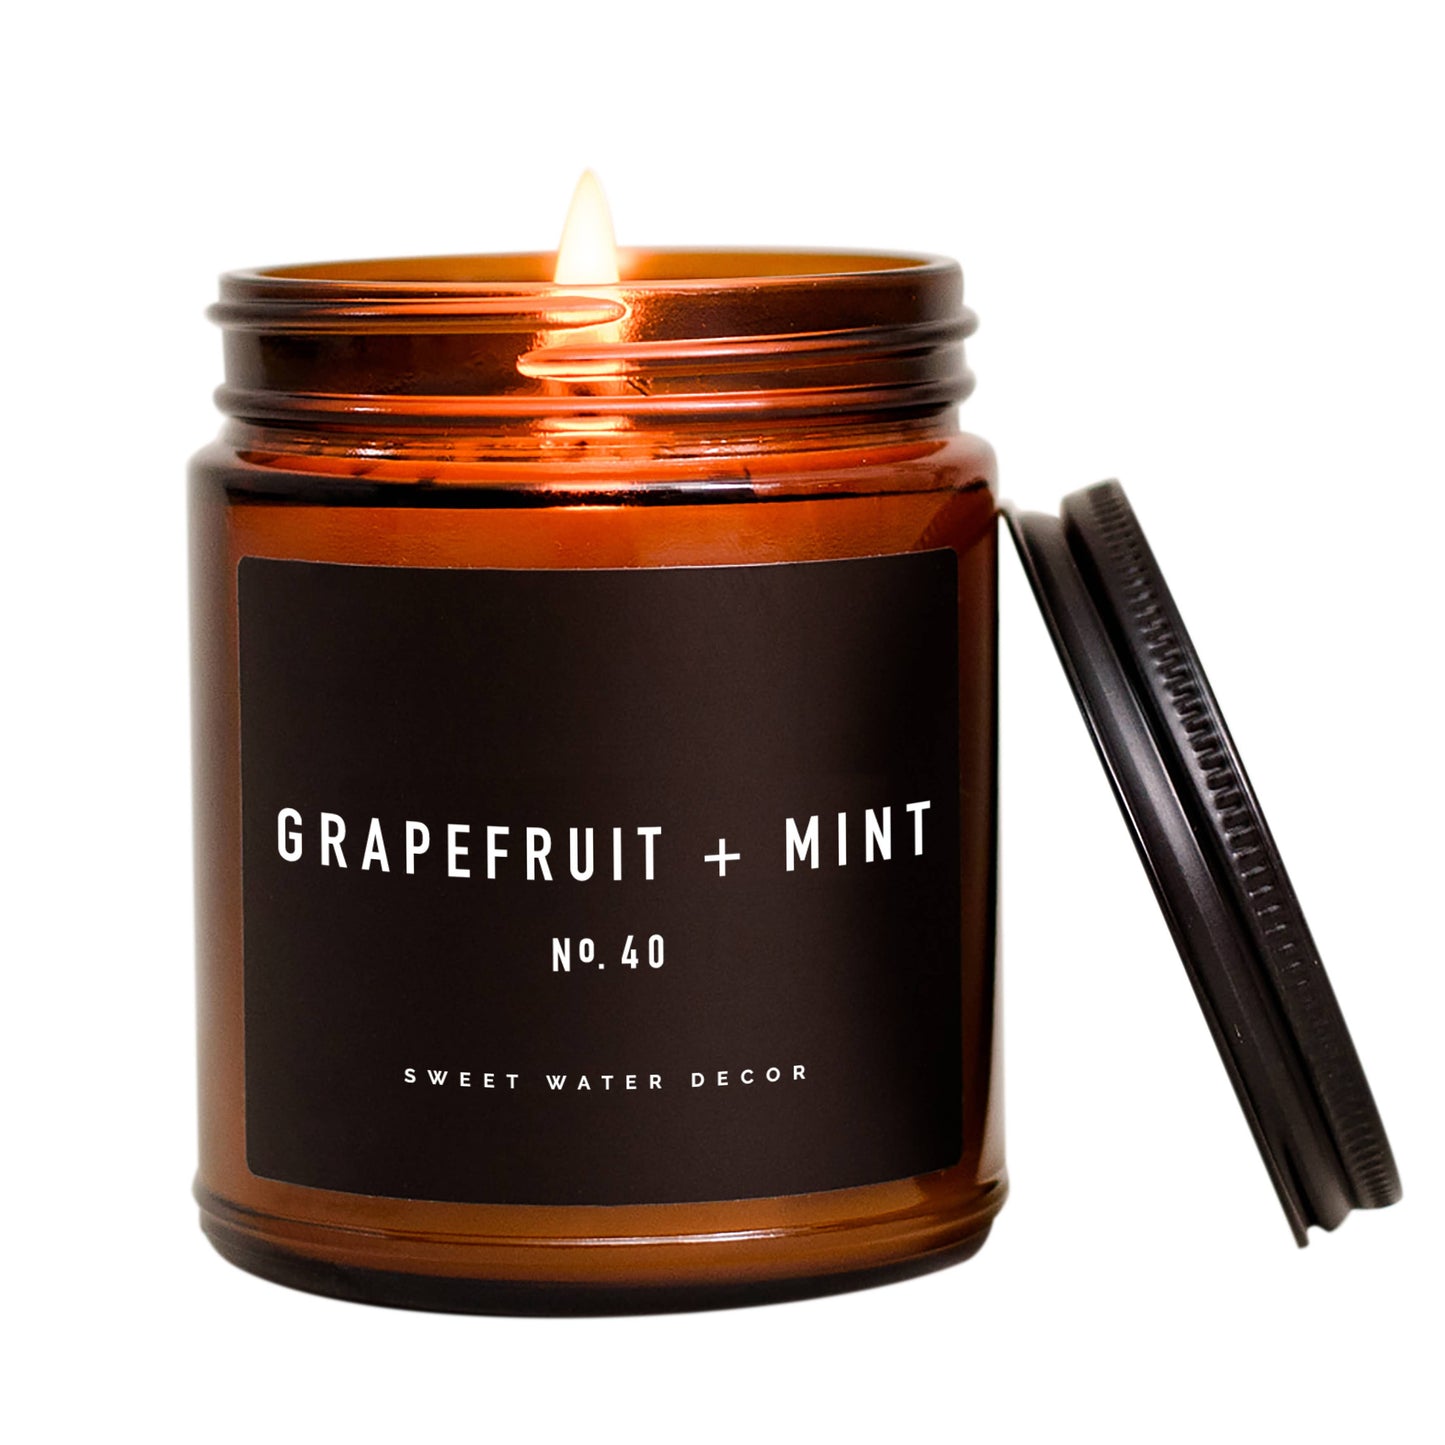 Grapefruit and Mint Soy Candle - Amber Jar - 9 oz